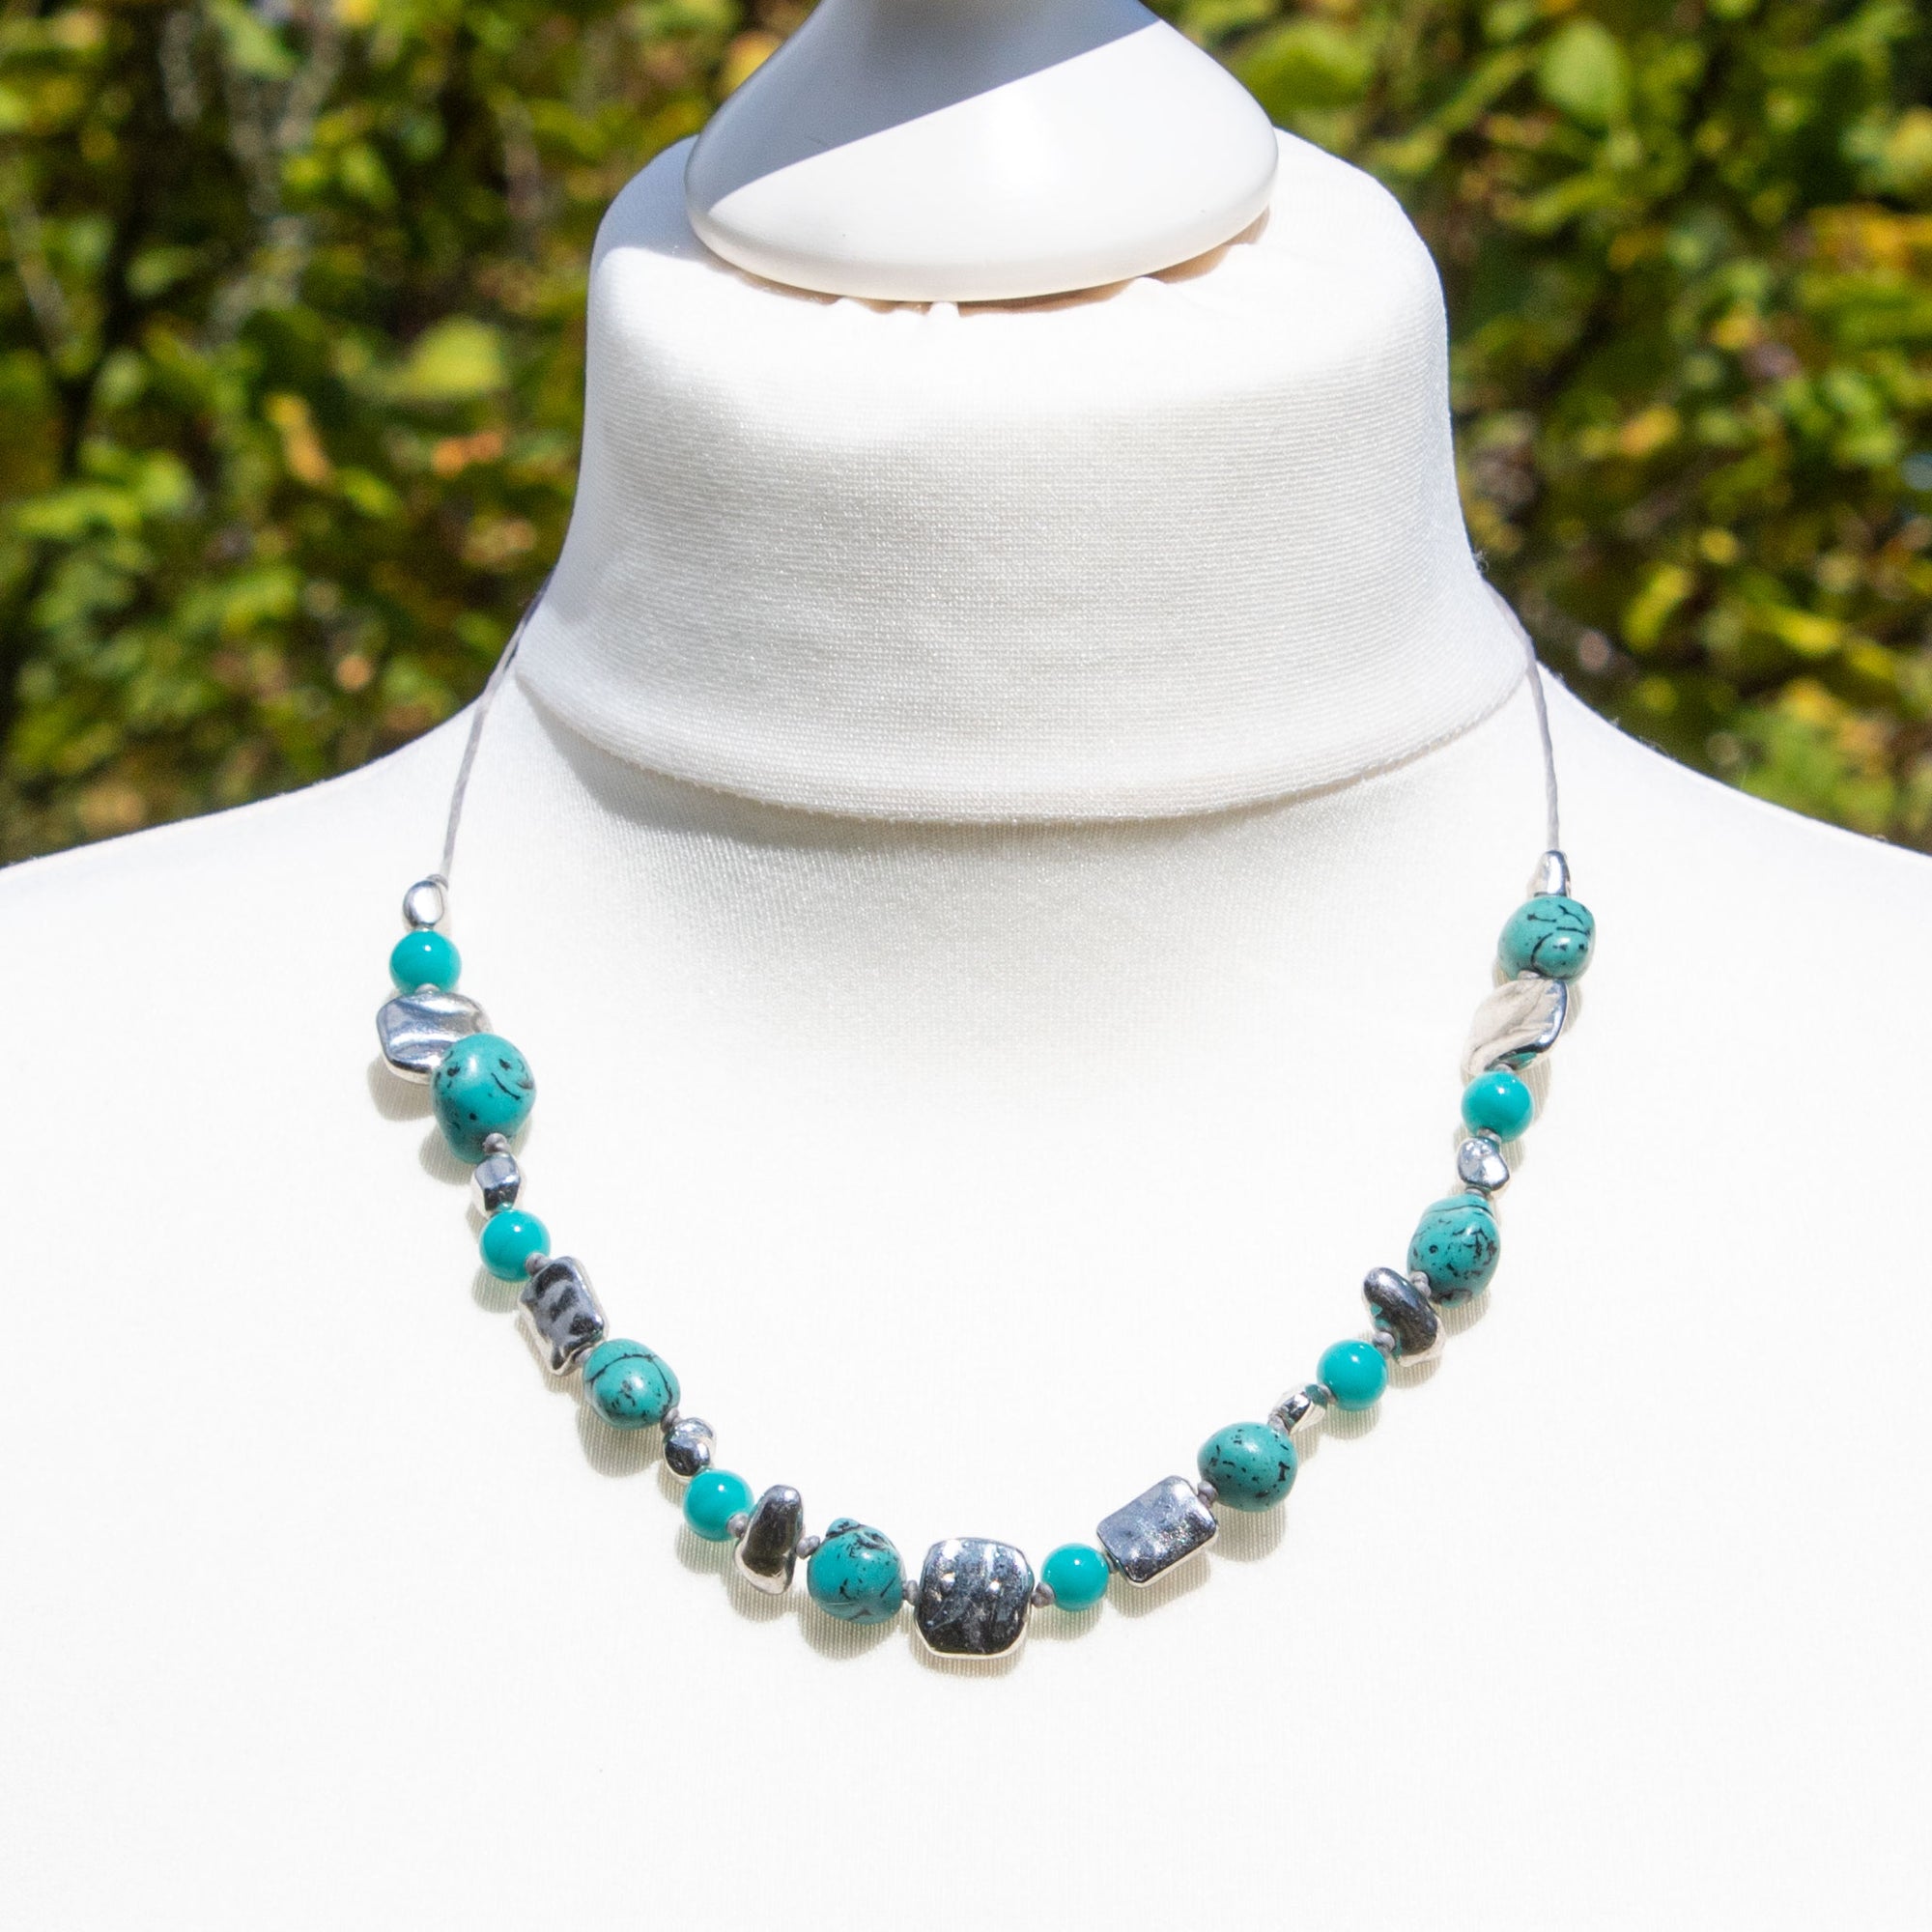 Turquoise Stone & Metallic Bead Necklace | Necklace - The Naughty Shrew